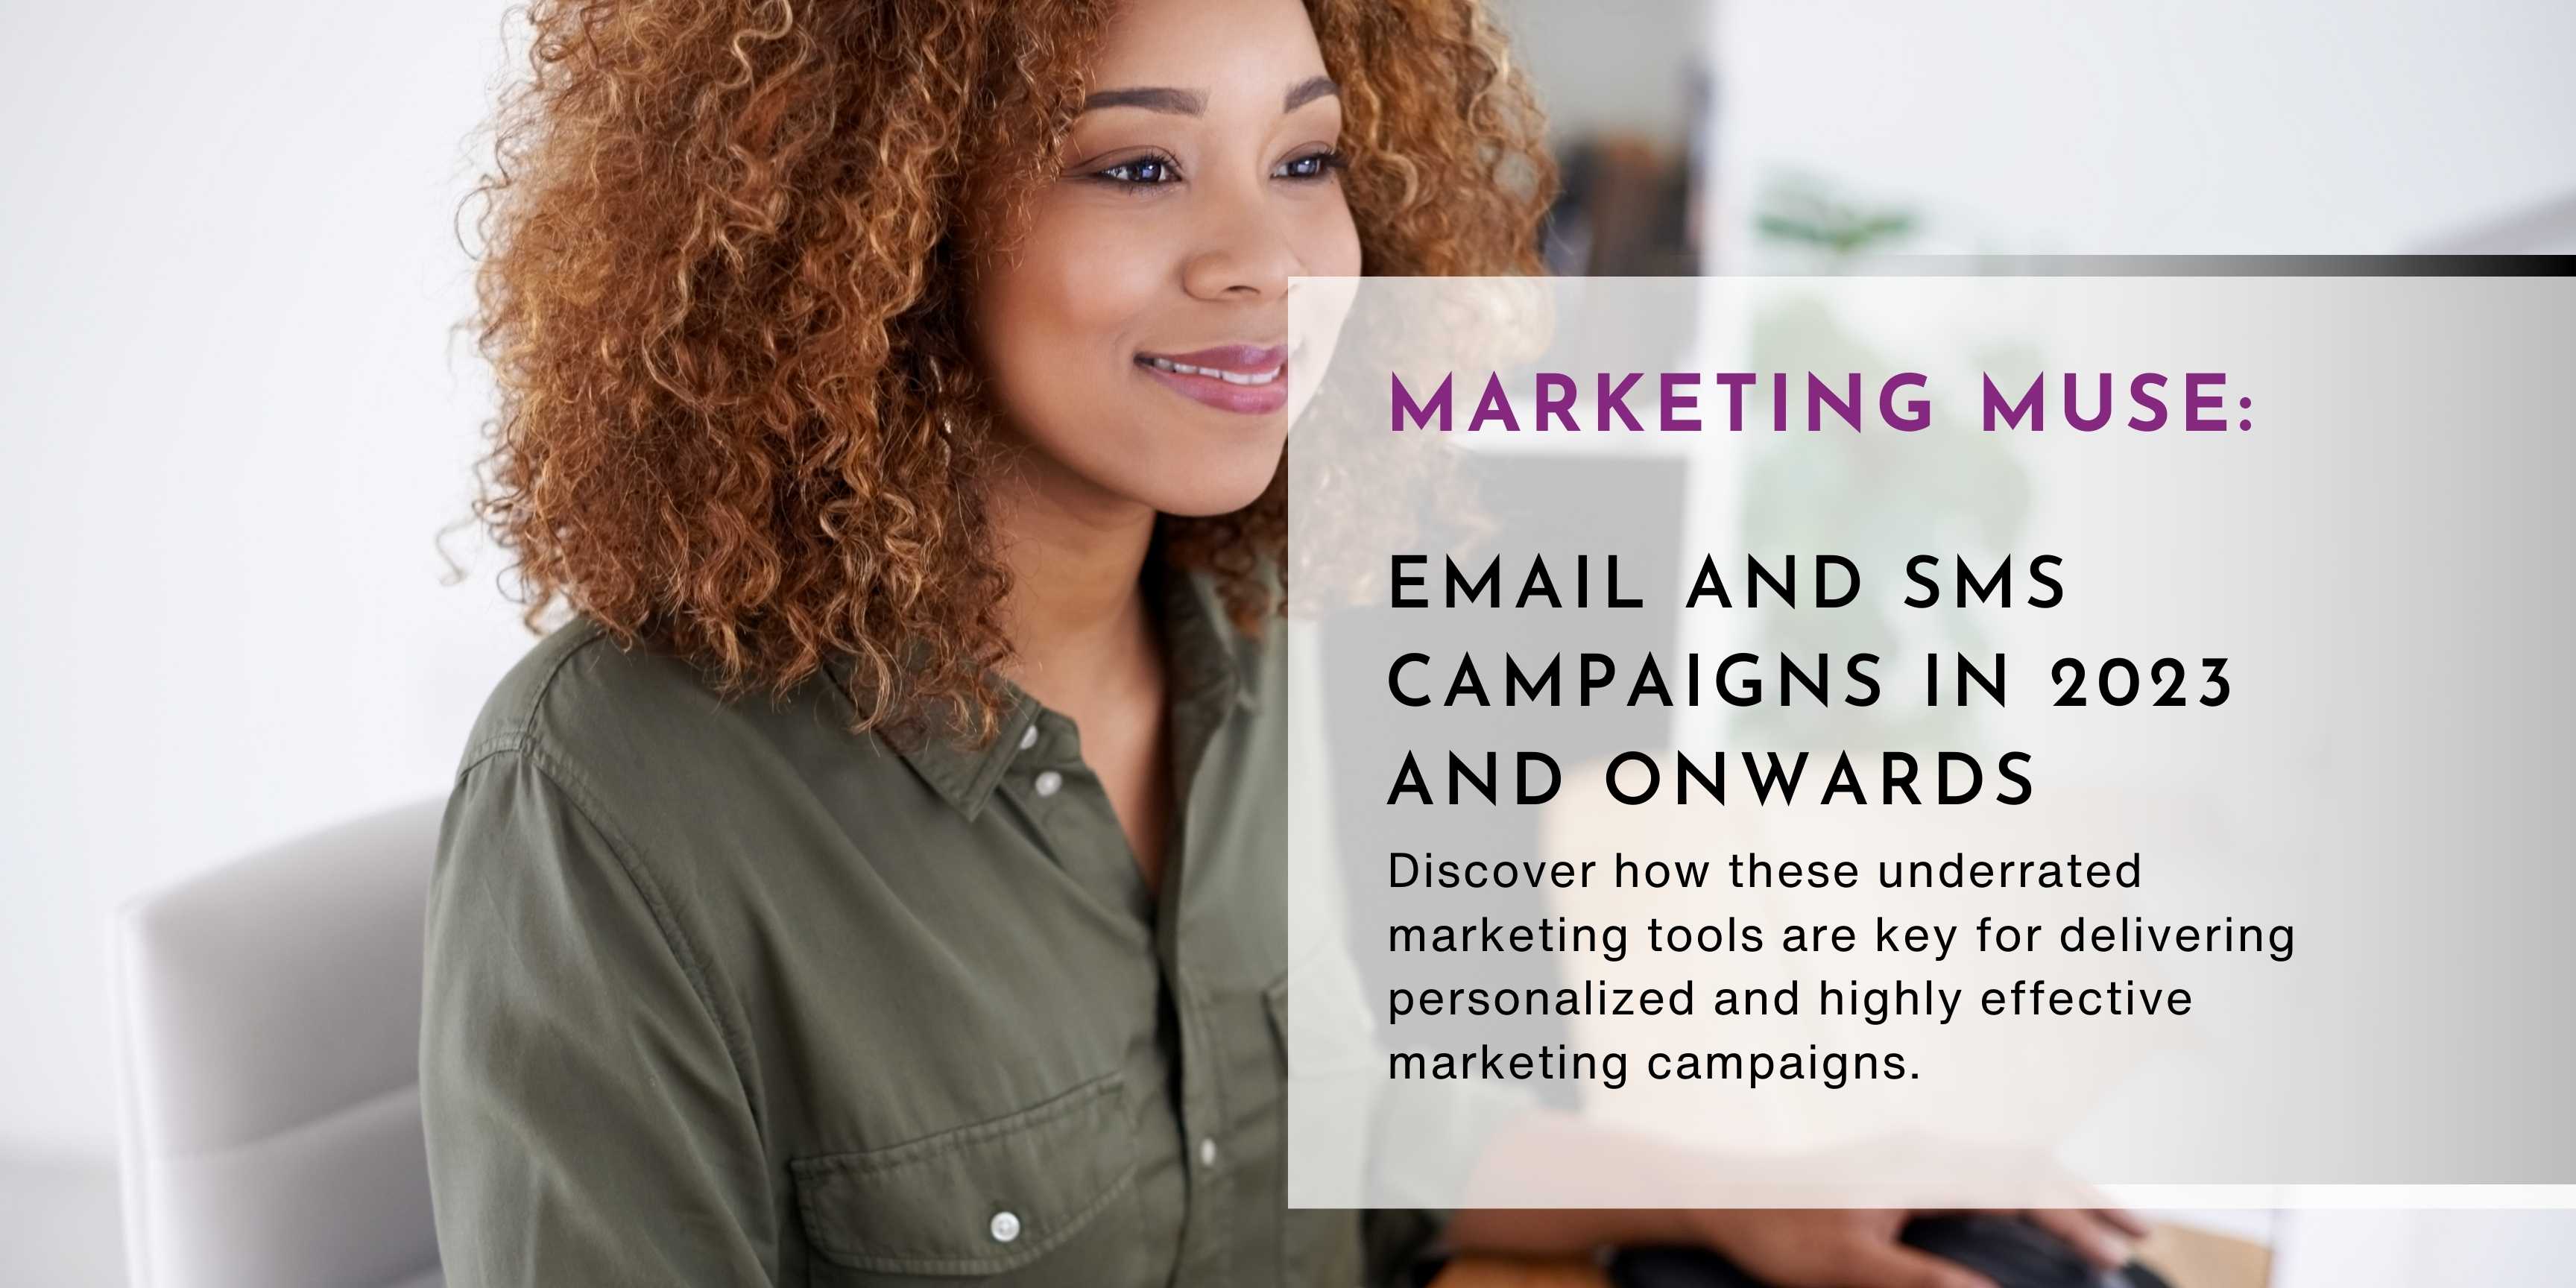 Marketing Muse: Email and SMS Campaigns in 2023 and Onwards